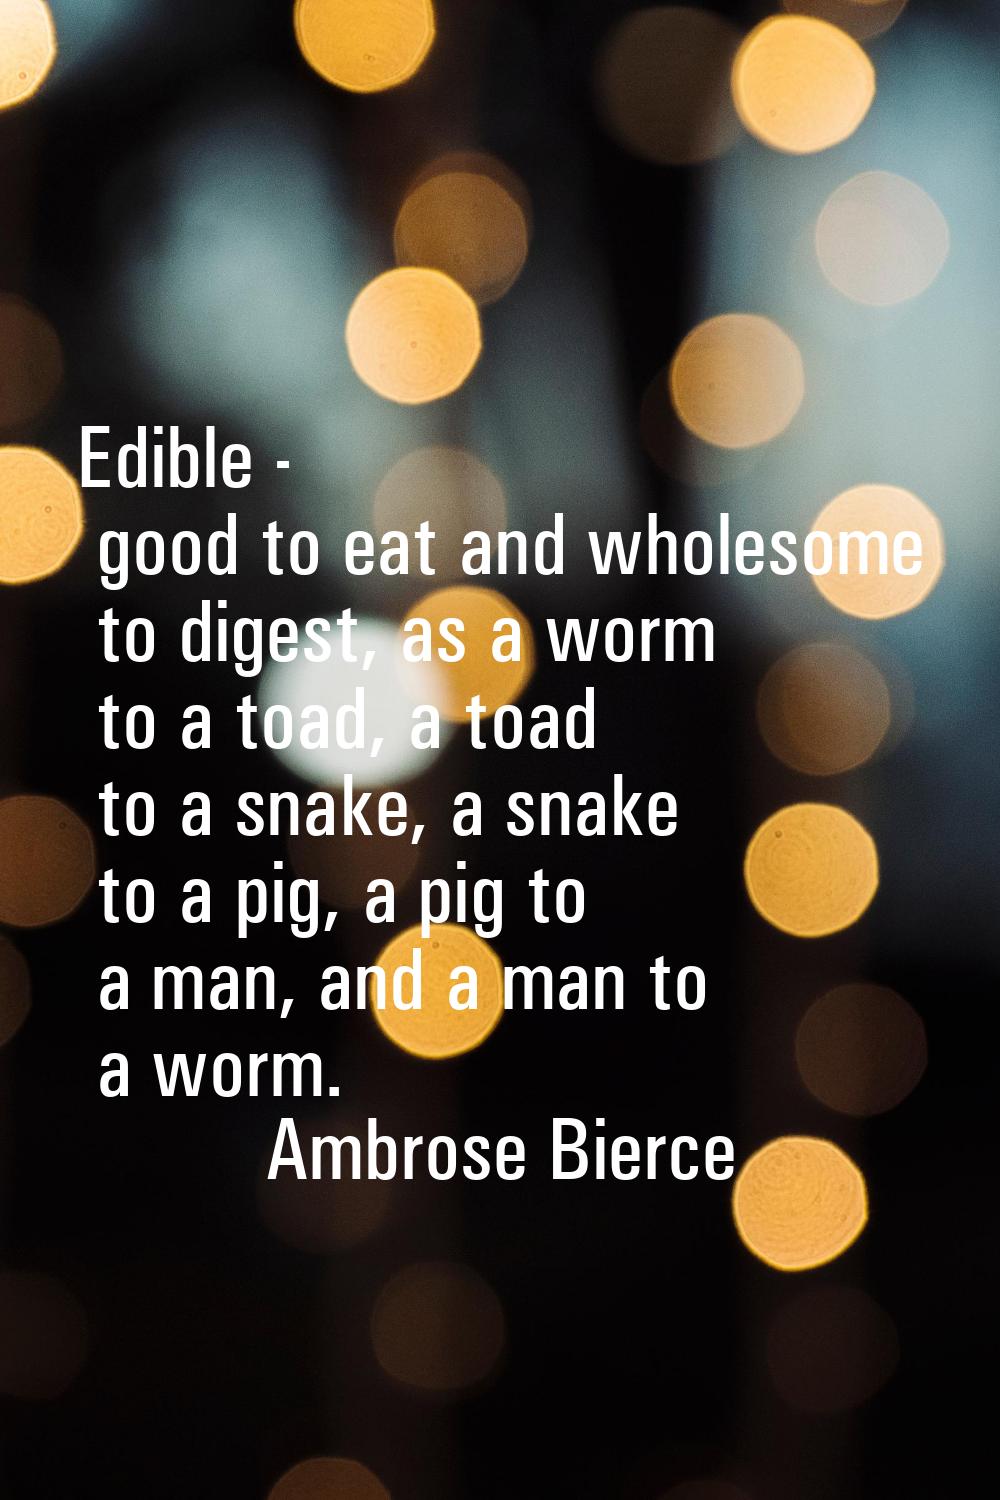 Edible - good to eat and wholesome to digest, as a worm to a toad, a toad to a snake, a snake to a 